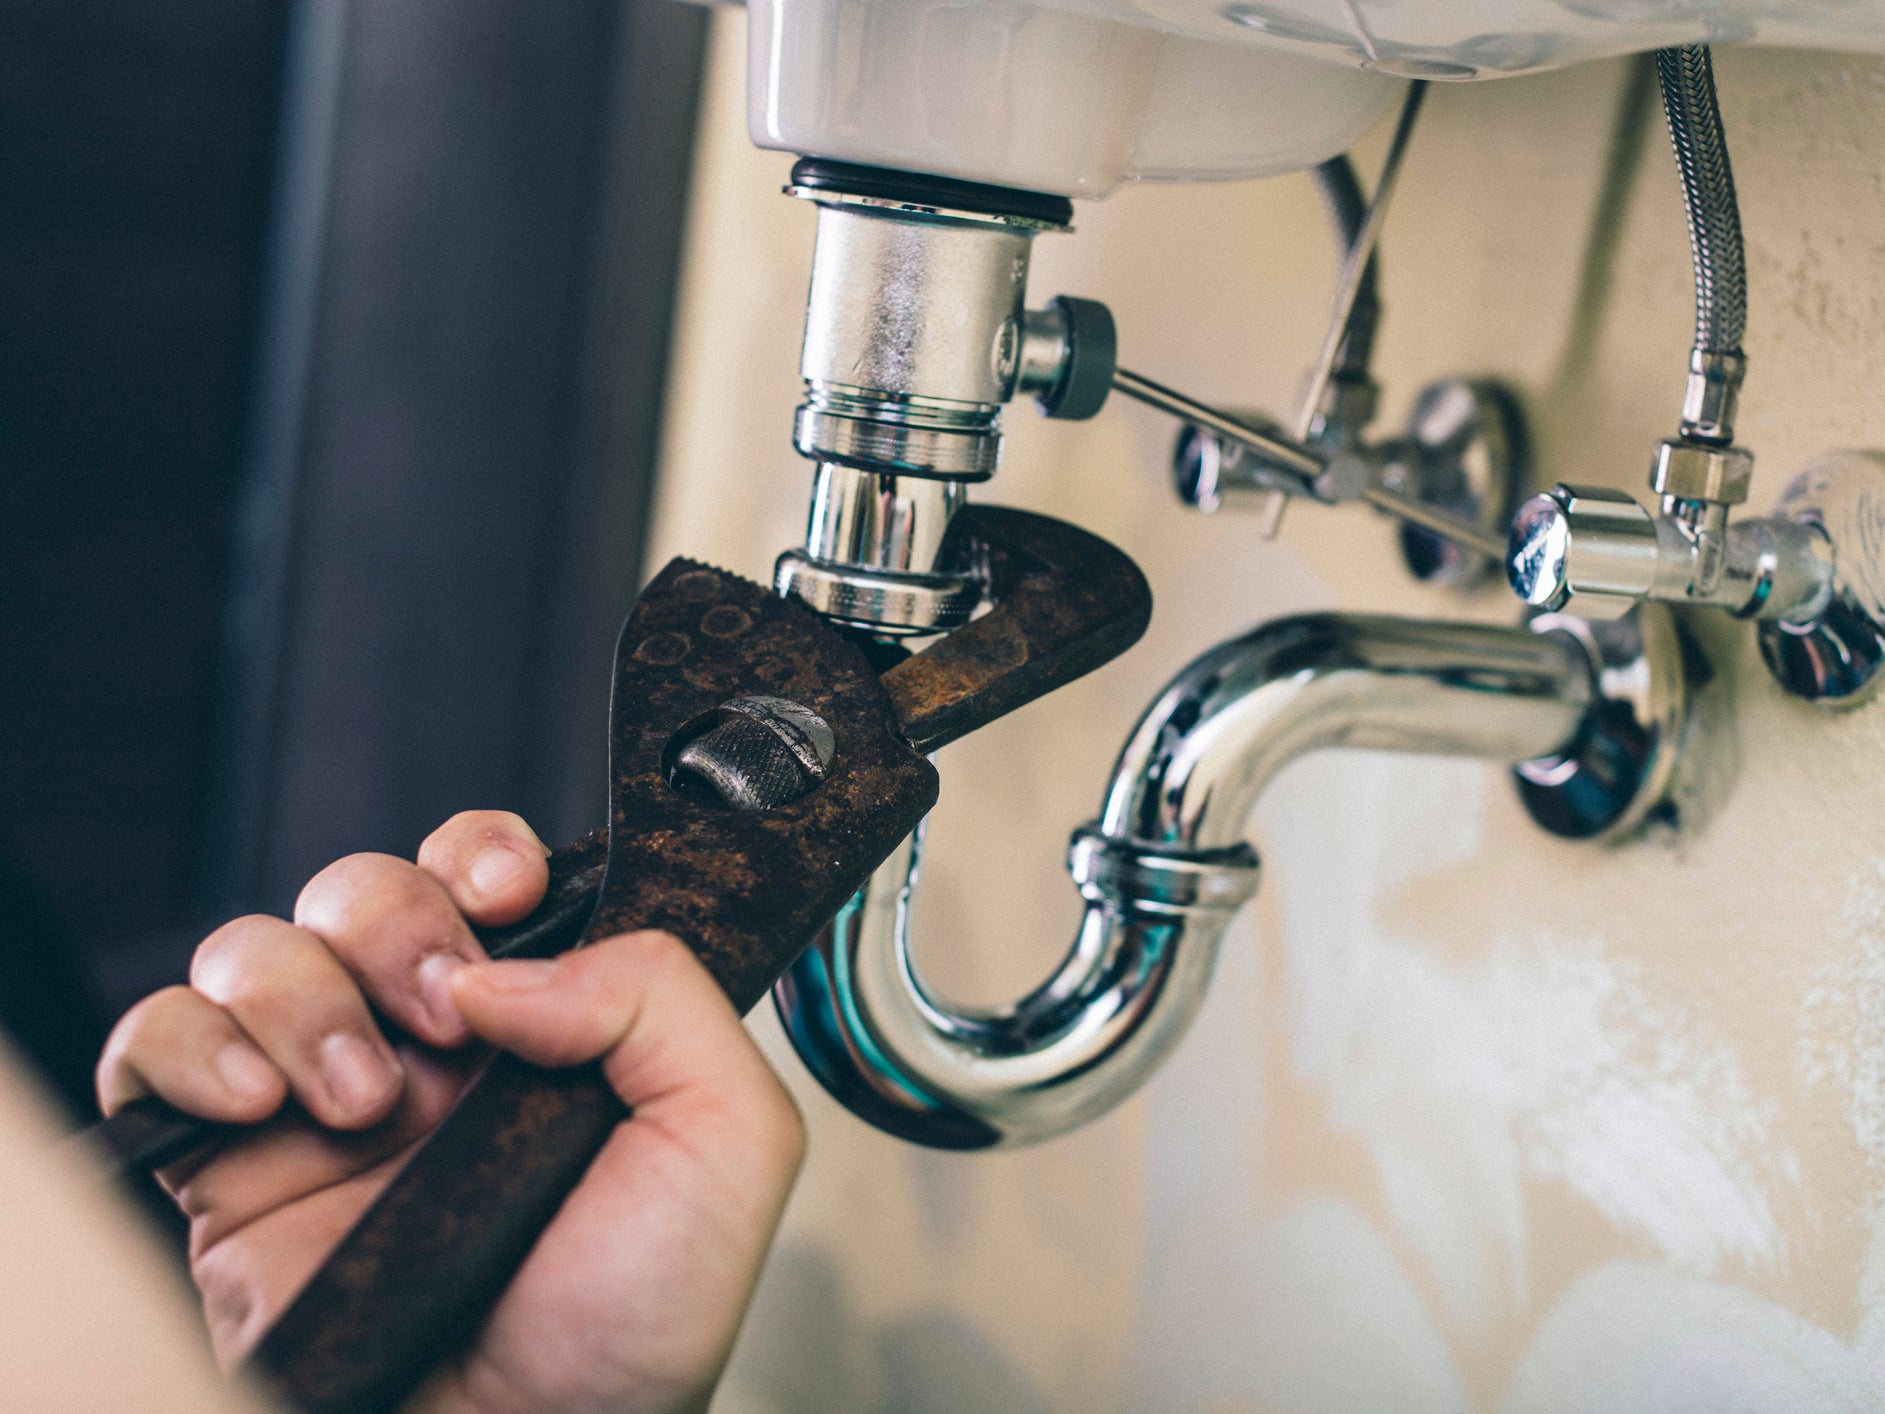 Plumbing Troubleshooting Solving Common Issues Like a Pro